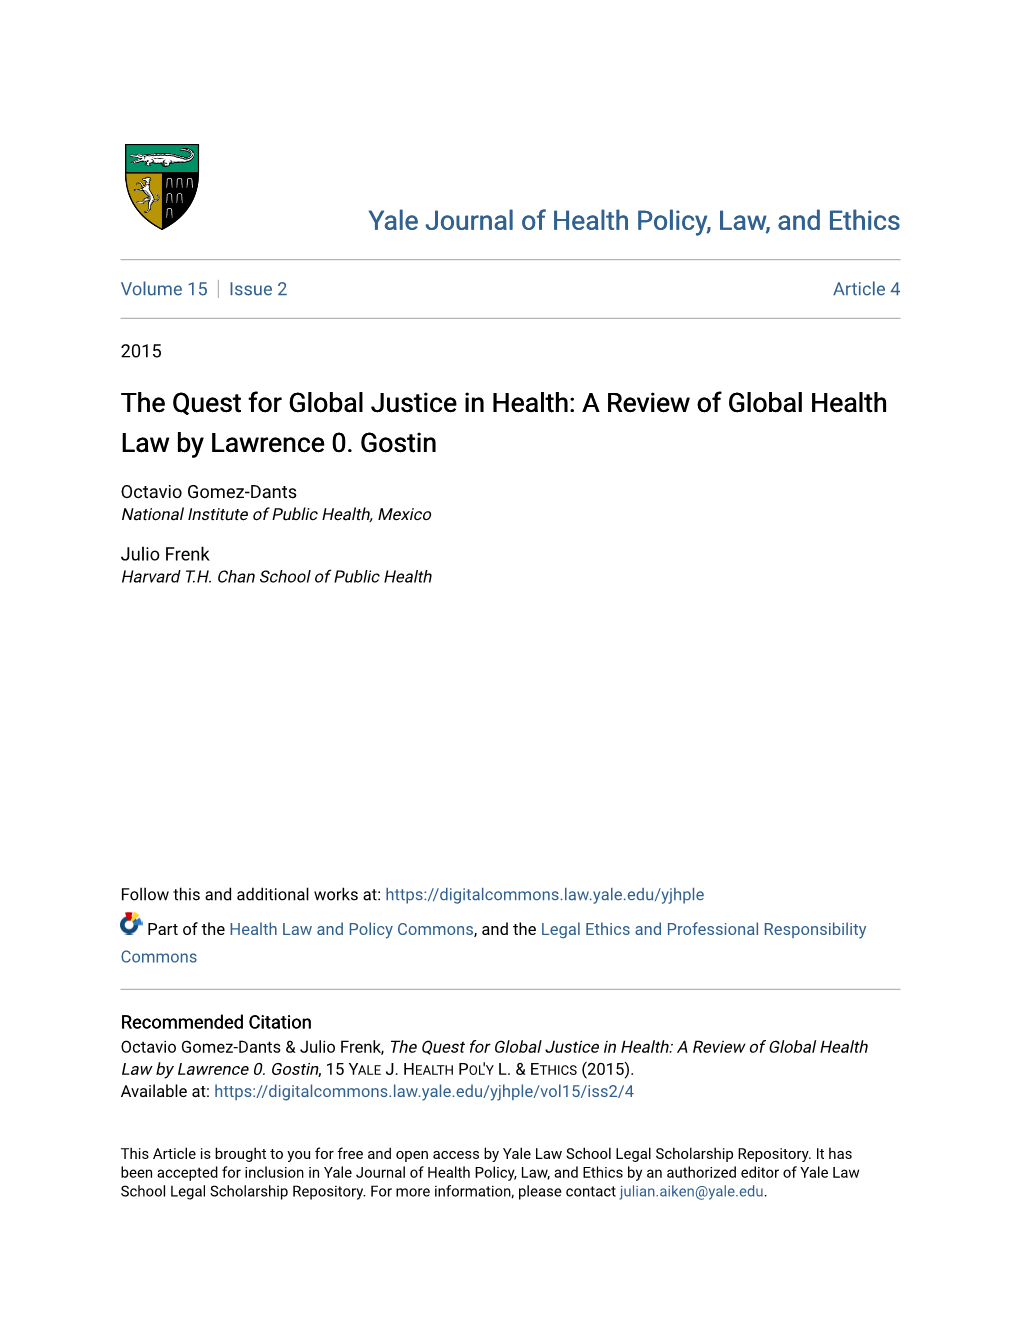 A Review of Global Health Law by Lawrence 0. Gostin